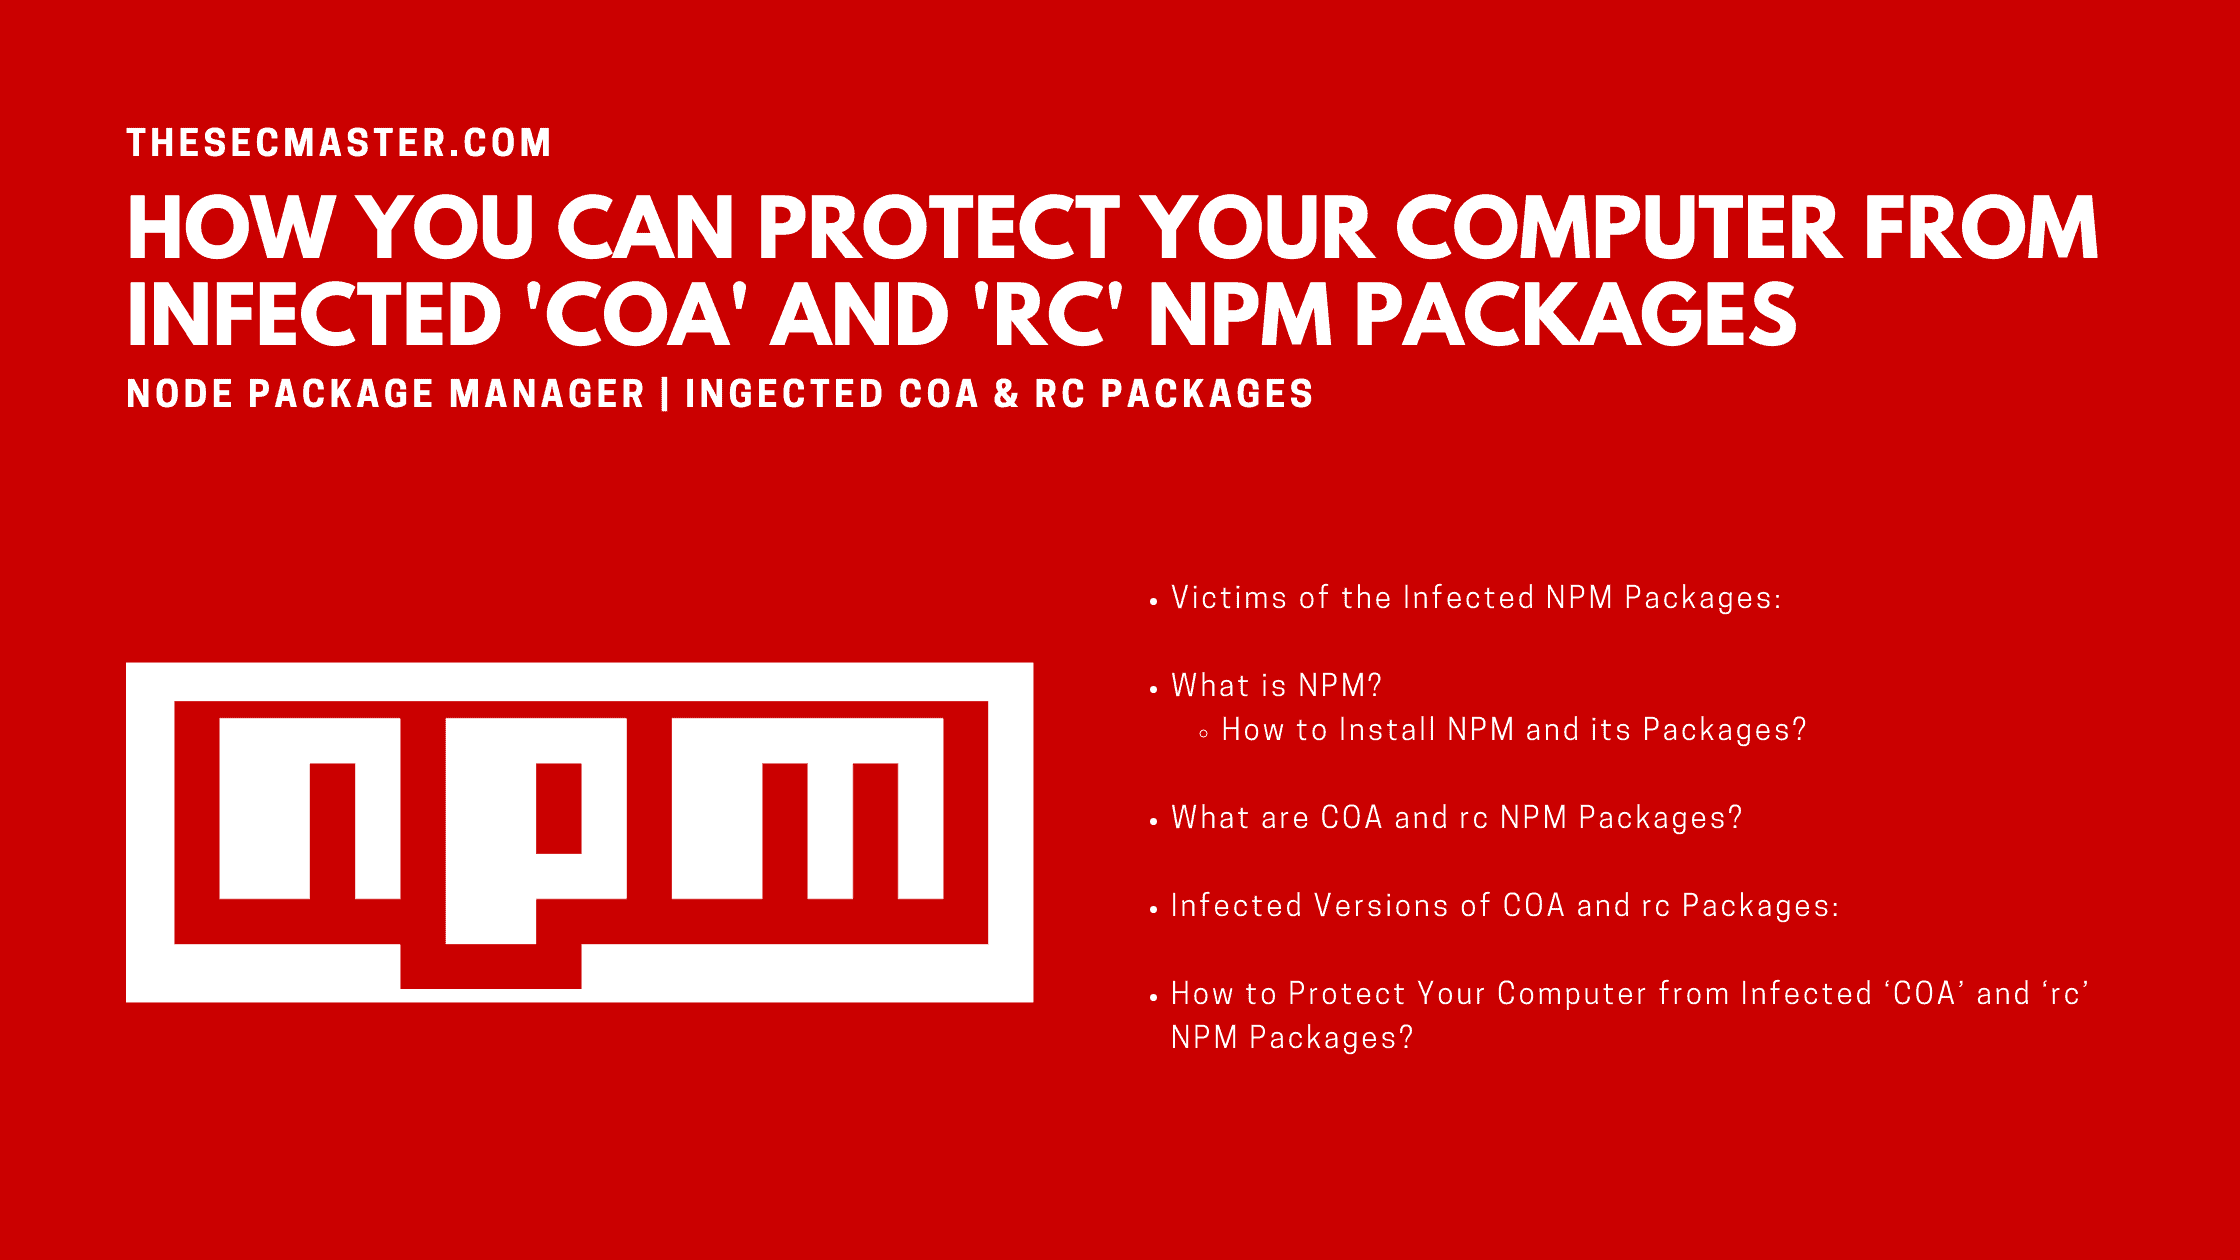 How Can You Protect Your Computer From Infected Coa And Rc Npm Packages